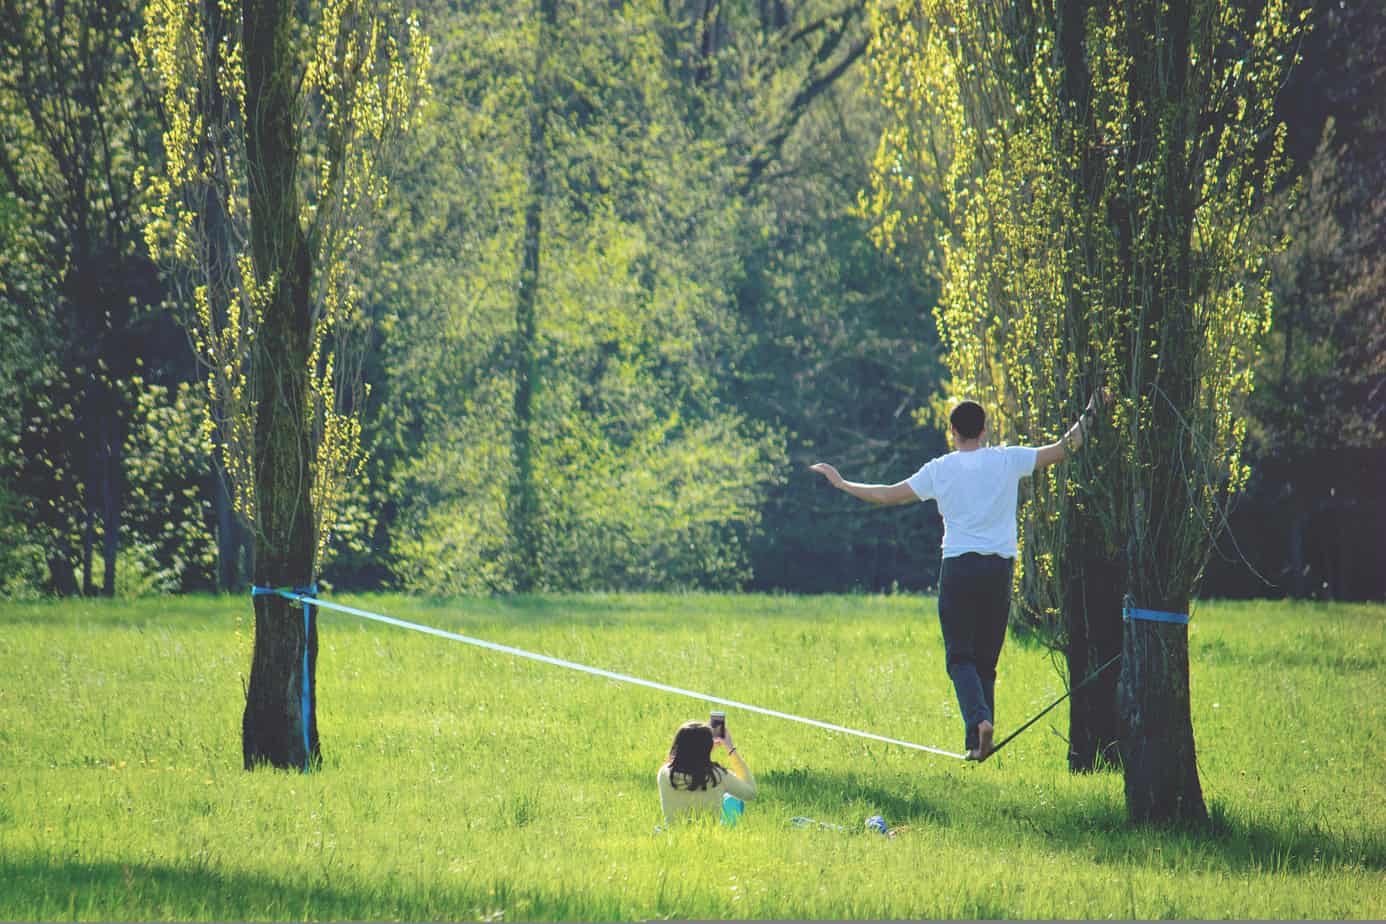 How Far Apart Should Trees Be For Slacklining?